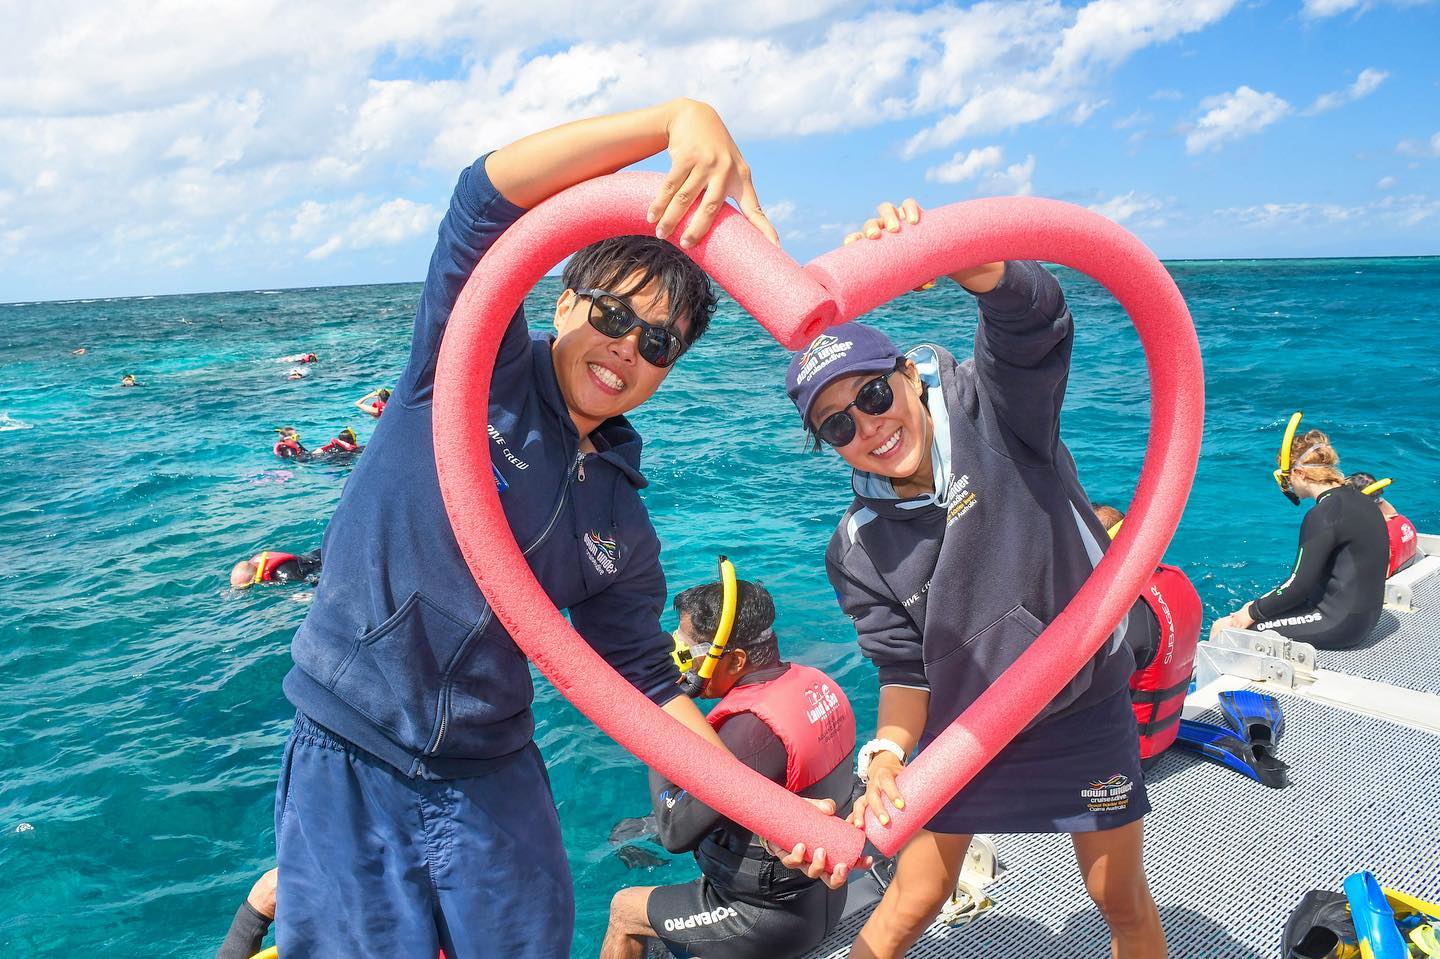 Down Under Cruise and Dive crew members with pool noodles in the shape of a heart on the reef